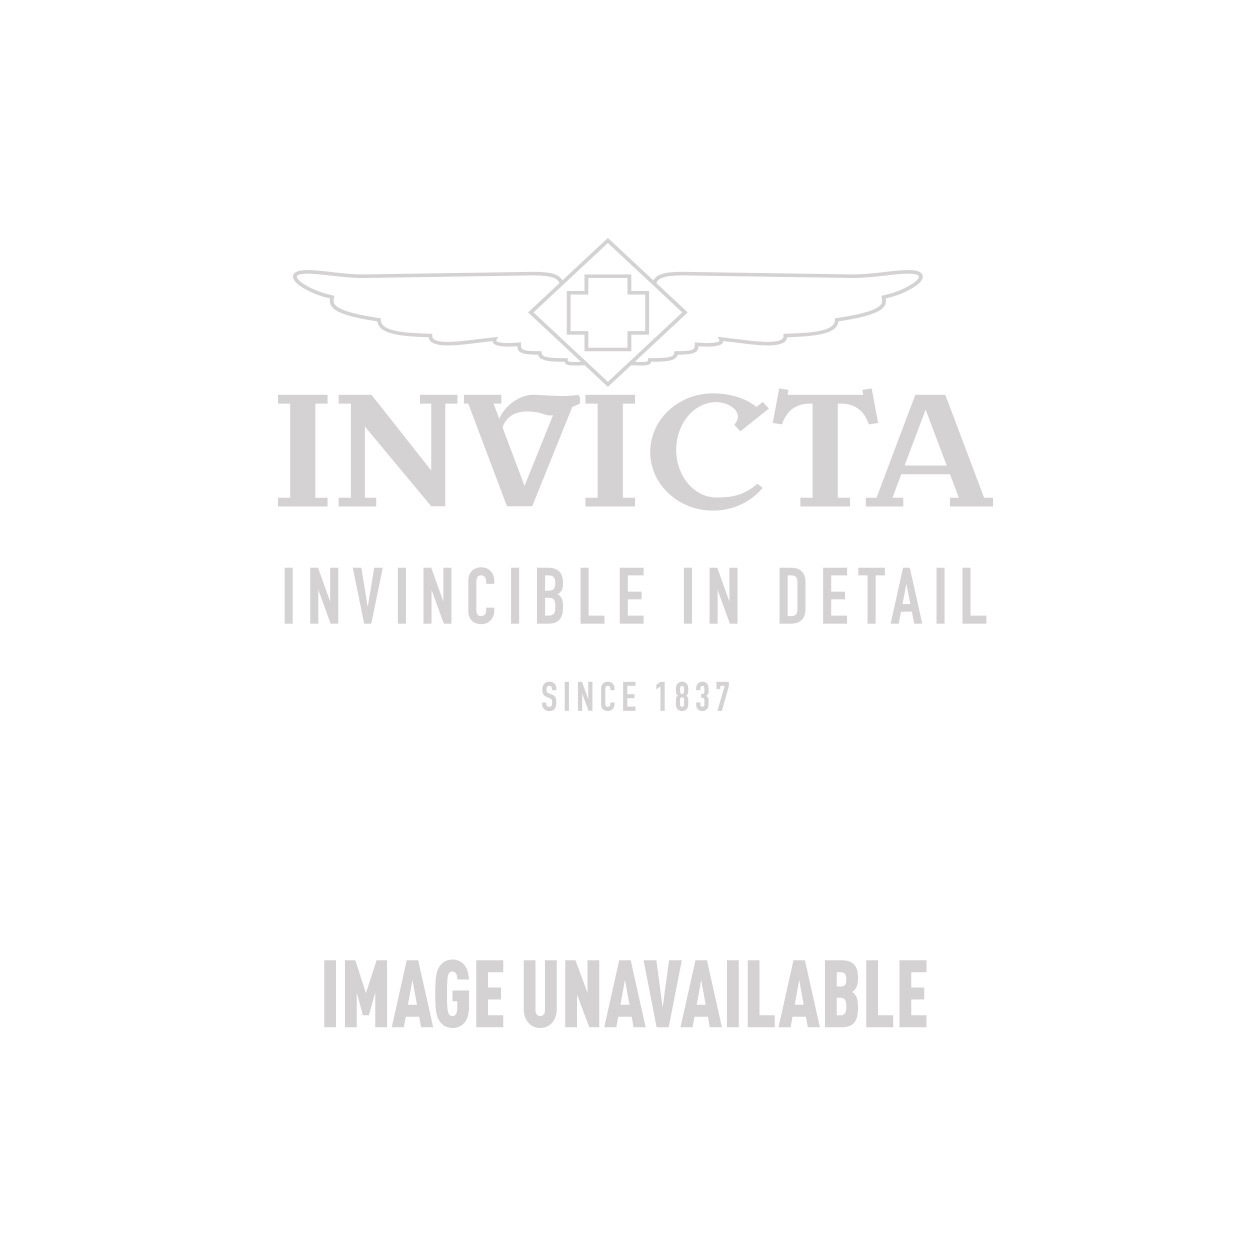 Invicta Specialty Swiss Movement Quartz Watch - Stainless Steel case Stainless Steel band - Model 6620